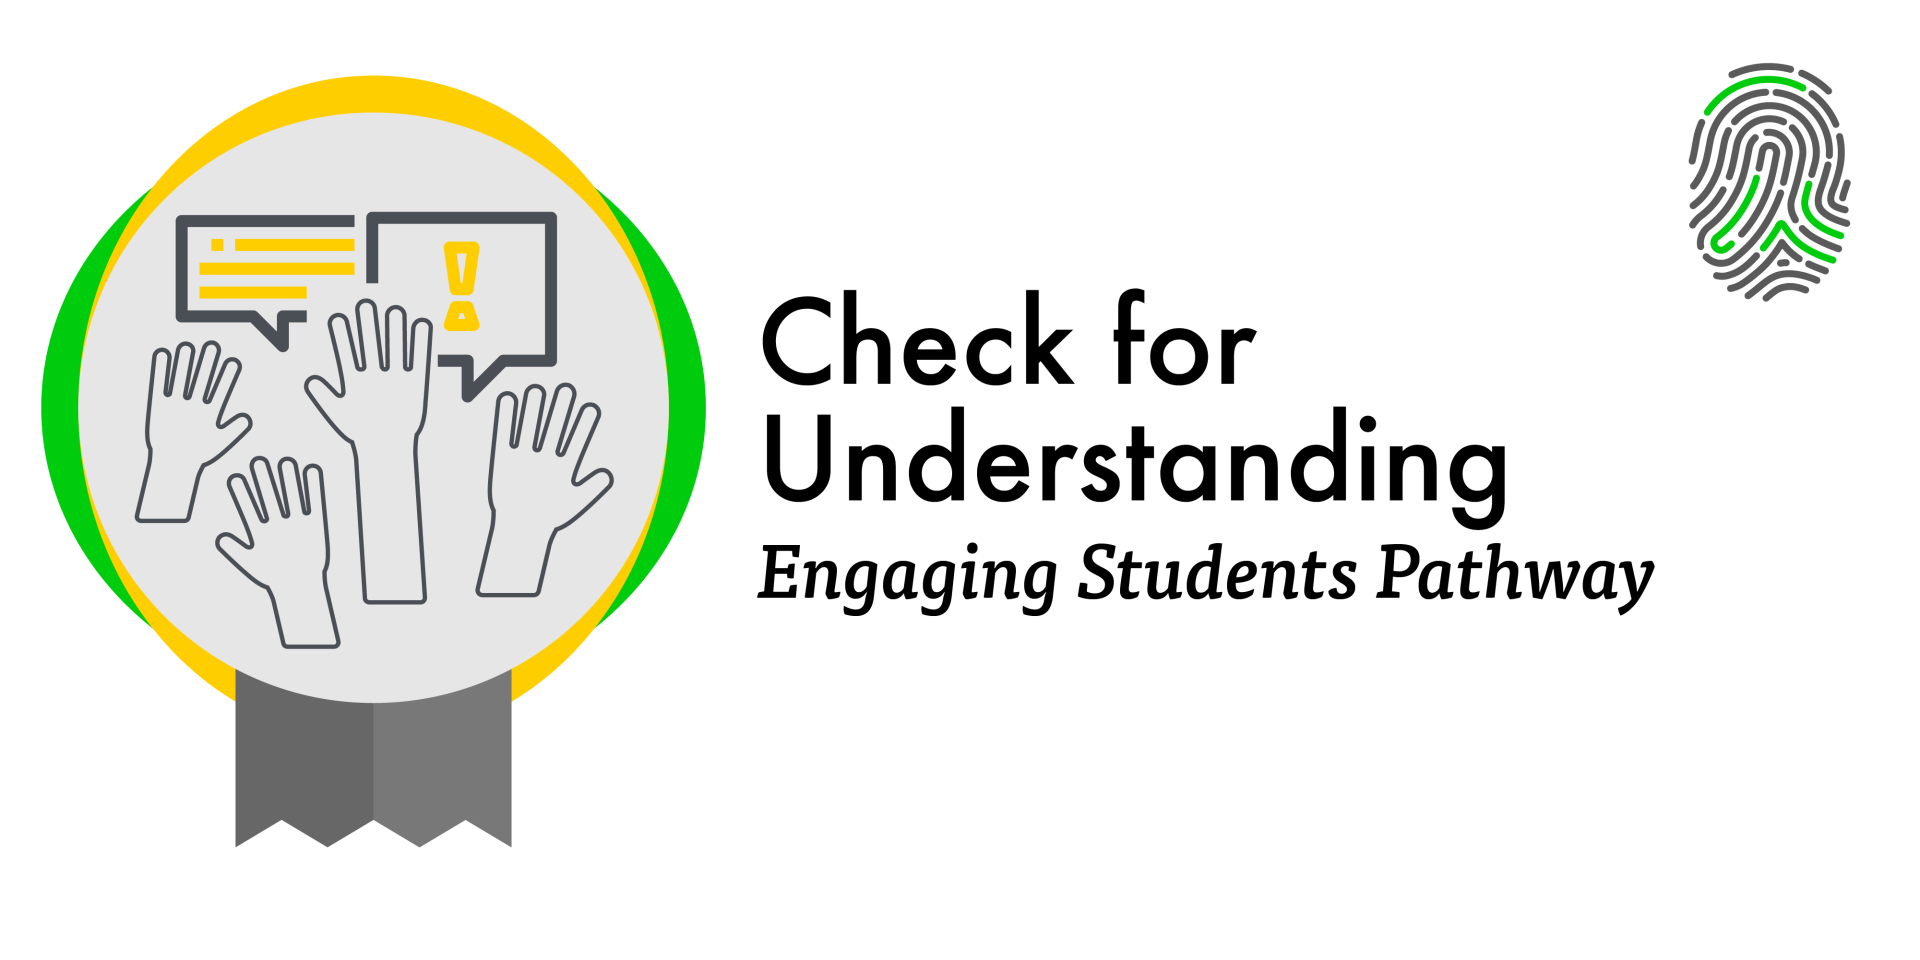 Check for Understanding, Engaging Students Pathway